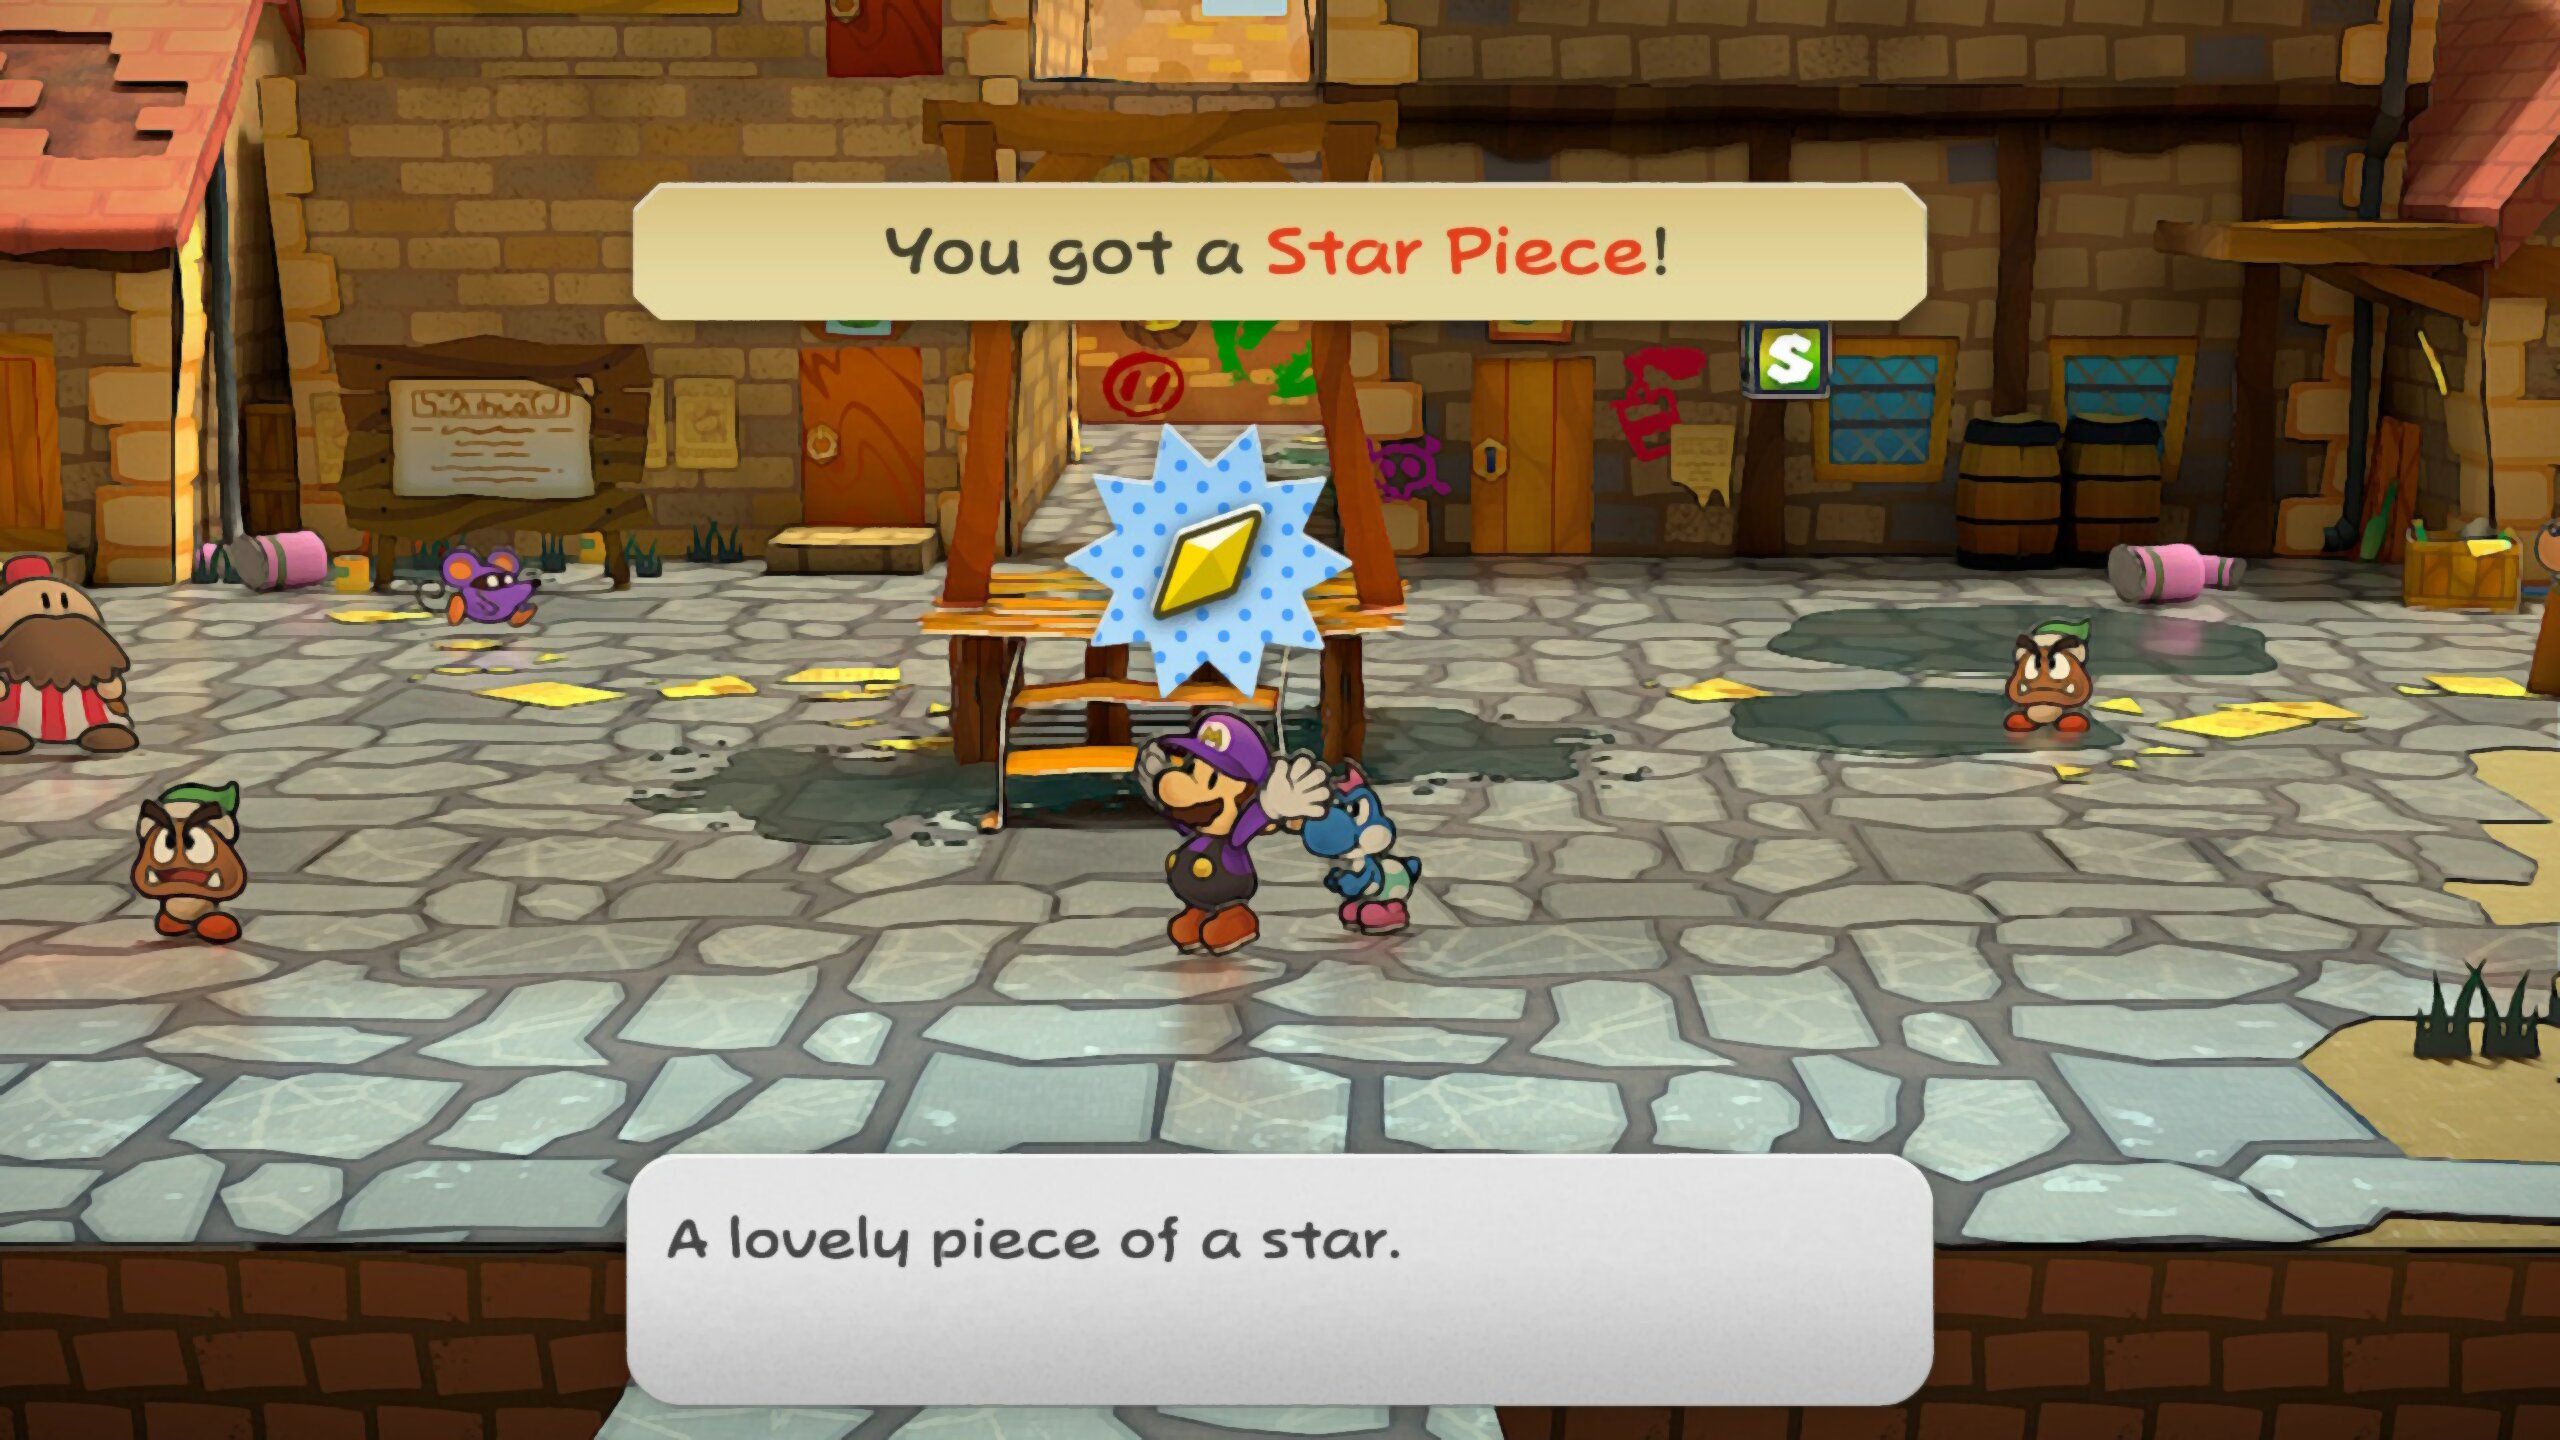 Image of a star piece in the middle of Rogueport in Paper Mario TTYD